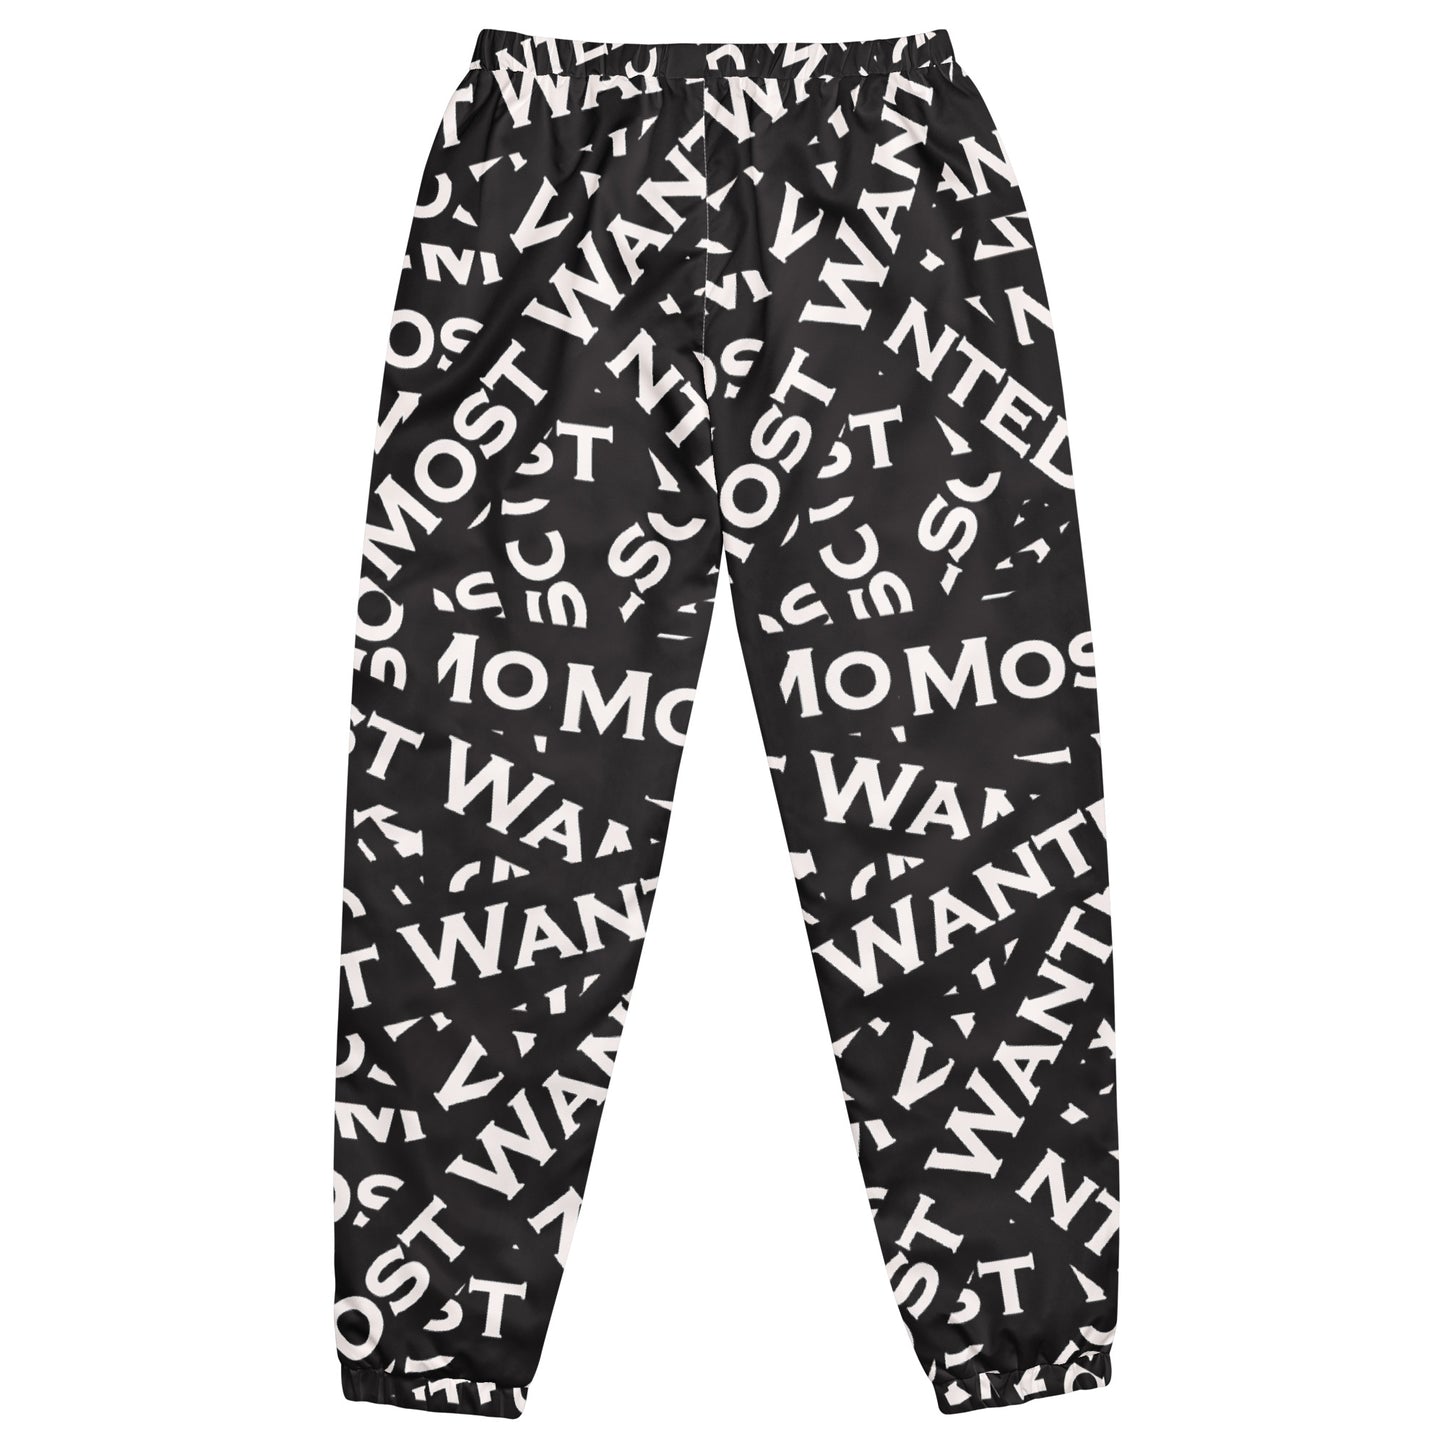 Most Wanted (Men's) "Full Send" Track Pants- Black